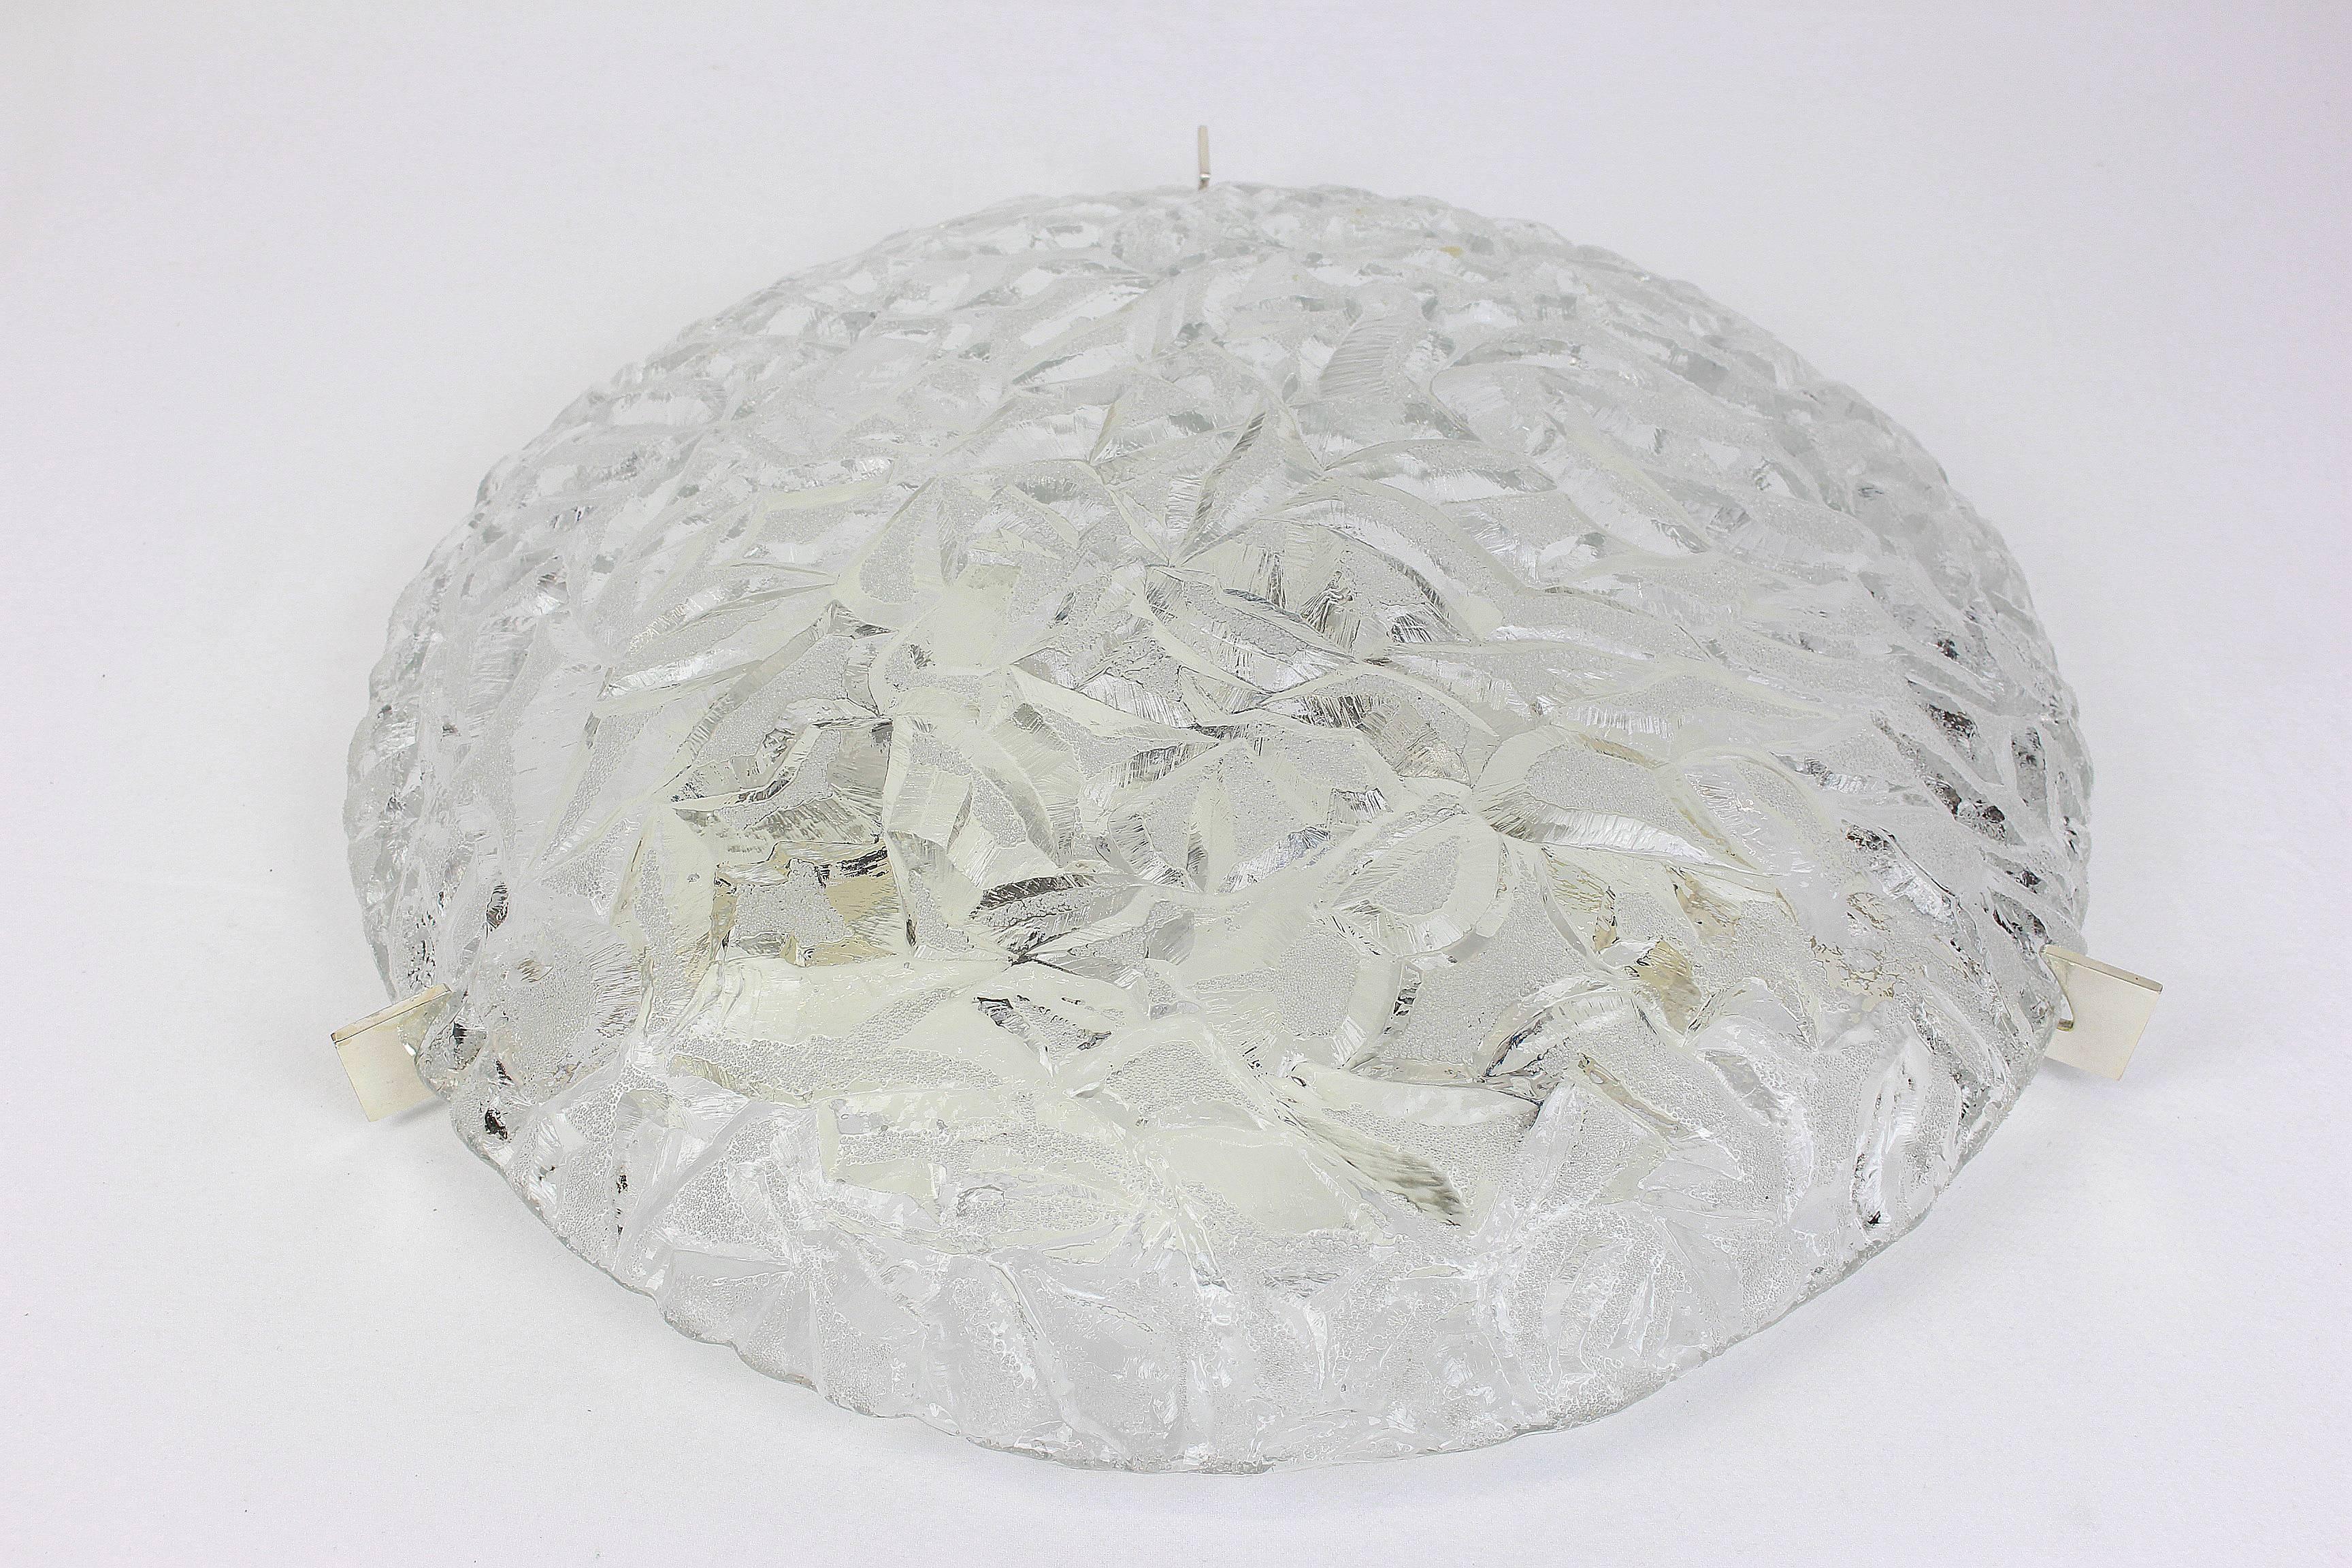 A wonderful round Murano glass flush mount made by Kaiser Leuchten in Germany, 1970s.
Thickly textured Murano glass fixture on a white metal base with three chrome holders.

High quality and in very good condition. Cleaned, well-wired and ready